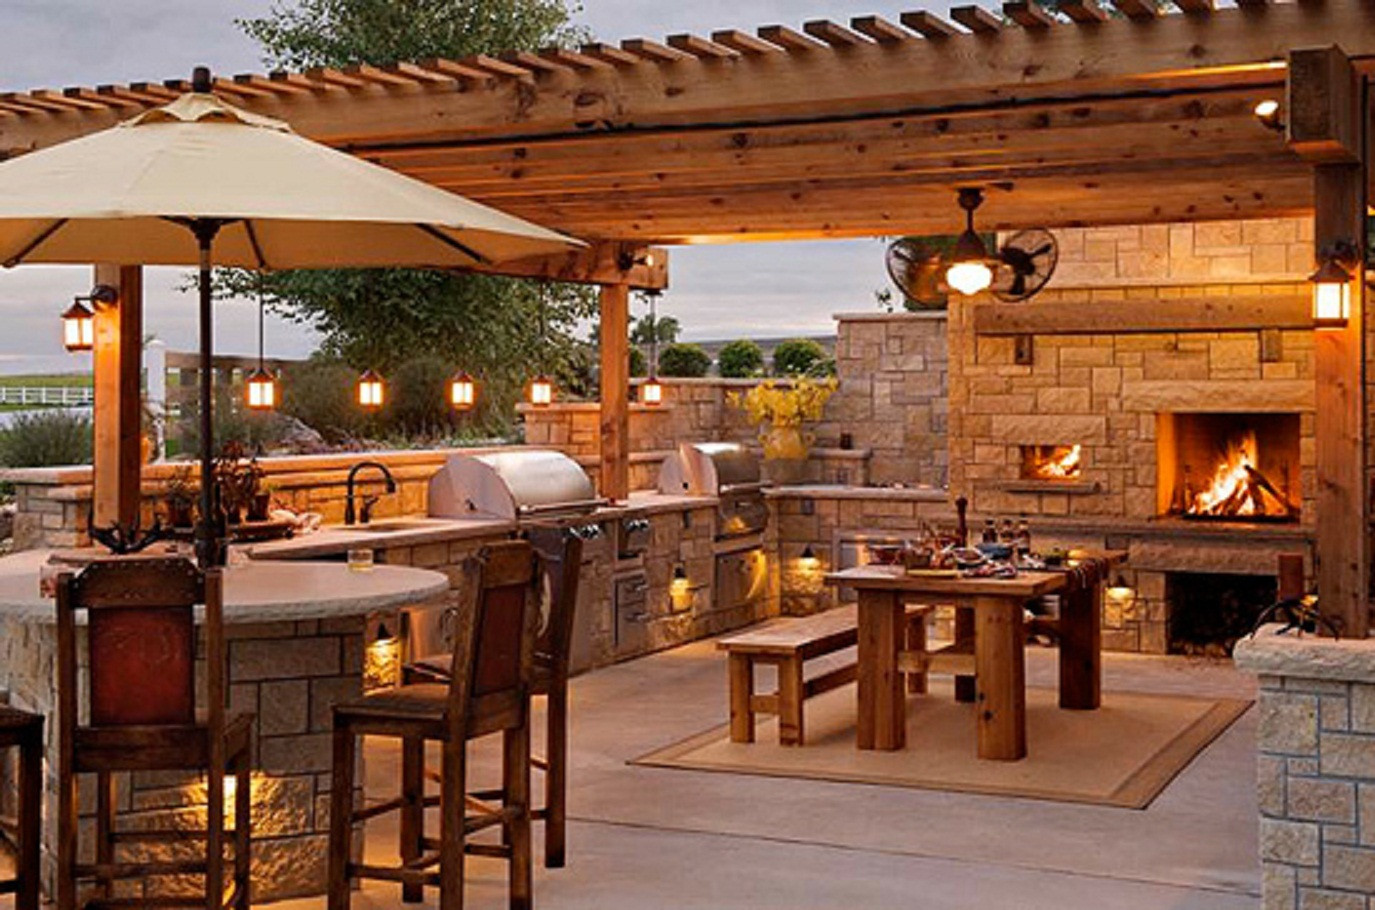 Outdoor Kitchen Pictures
 How to Design Your Perfect Outdoor kitchen Outdoor